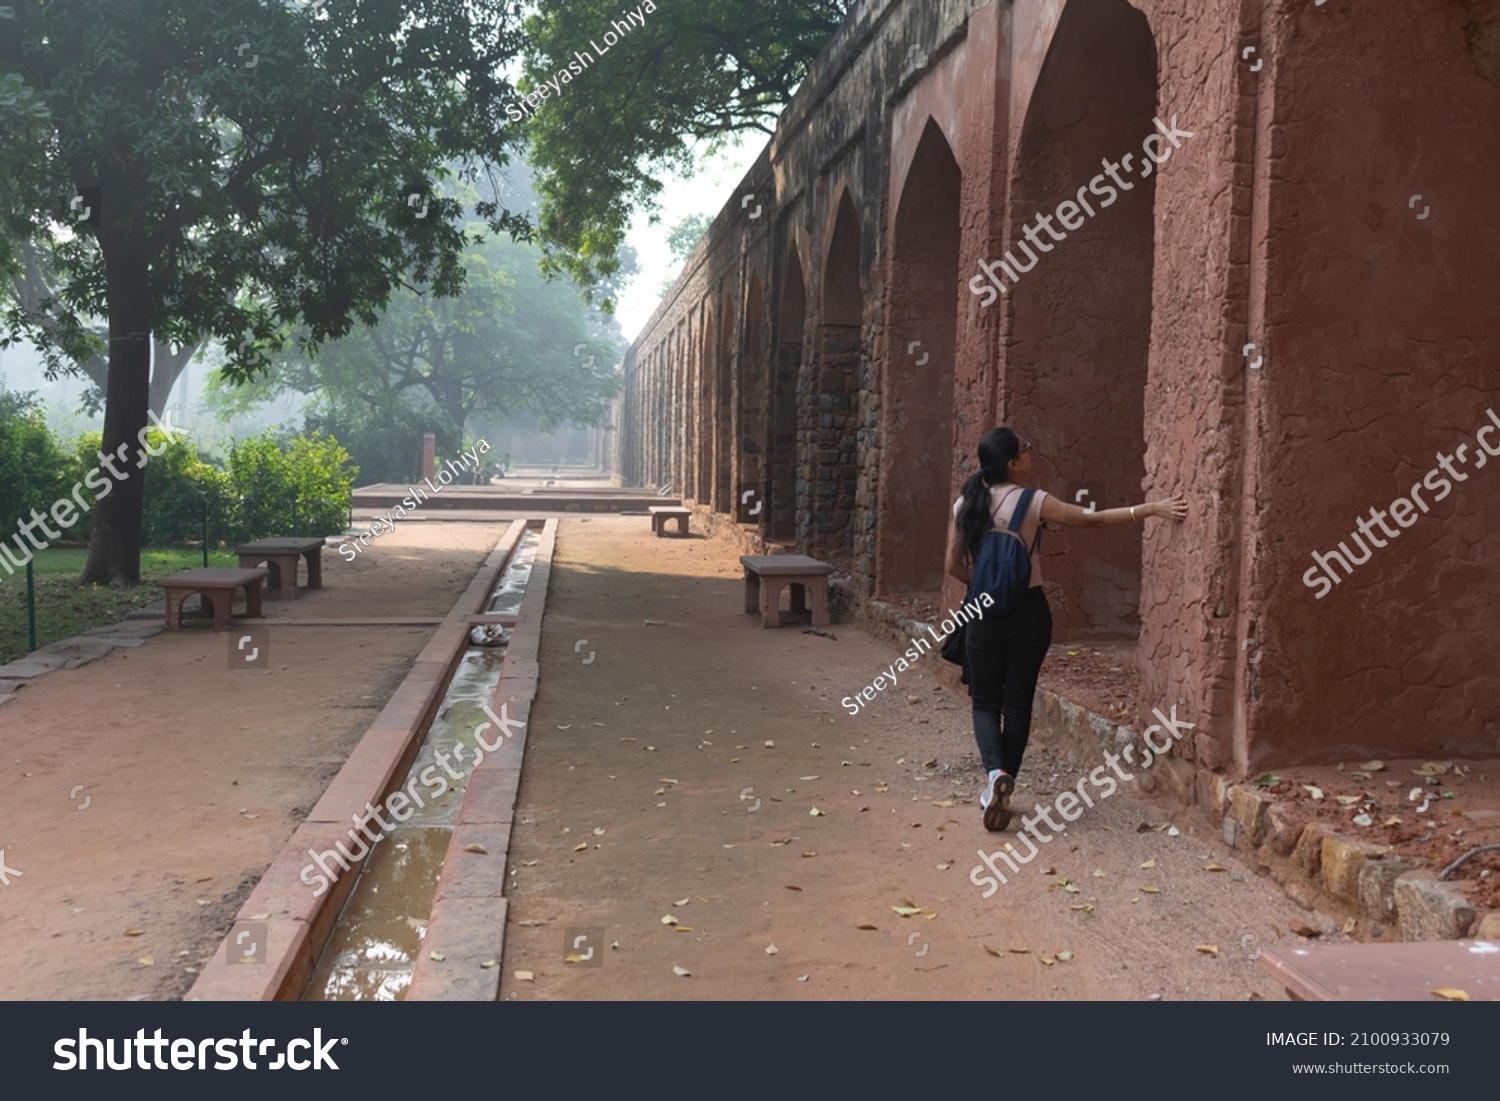 Traveler or tourist exploring historical structure of Humayun's tomb which is a UNESCO world heritage site situated in Delhi. History, geography, site seeing, architecture, archaeology, travel, study #2100933079